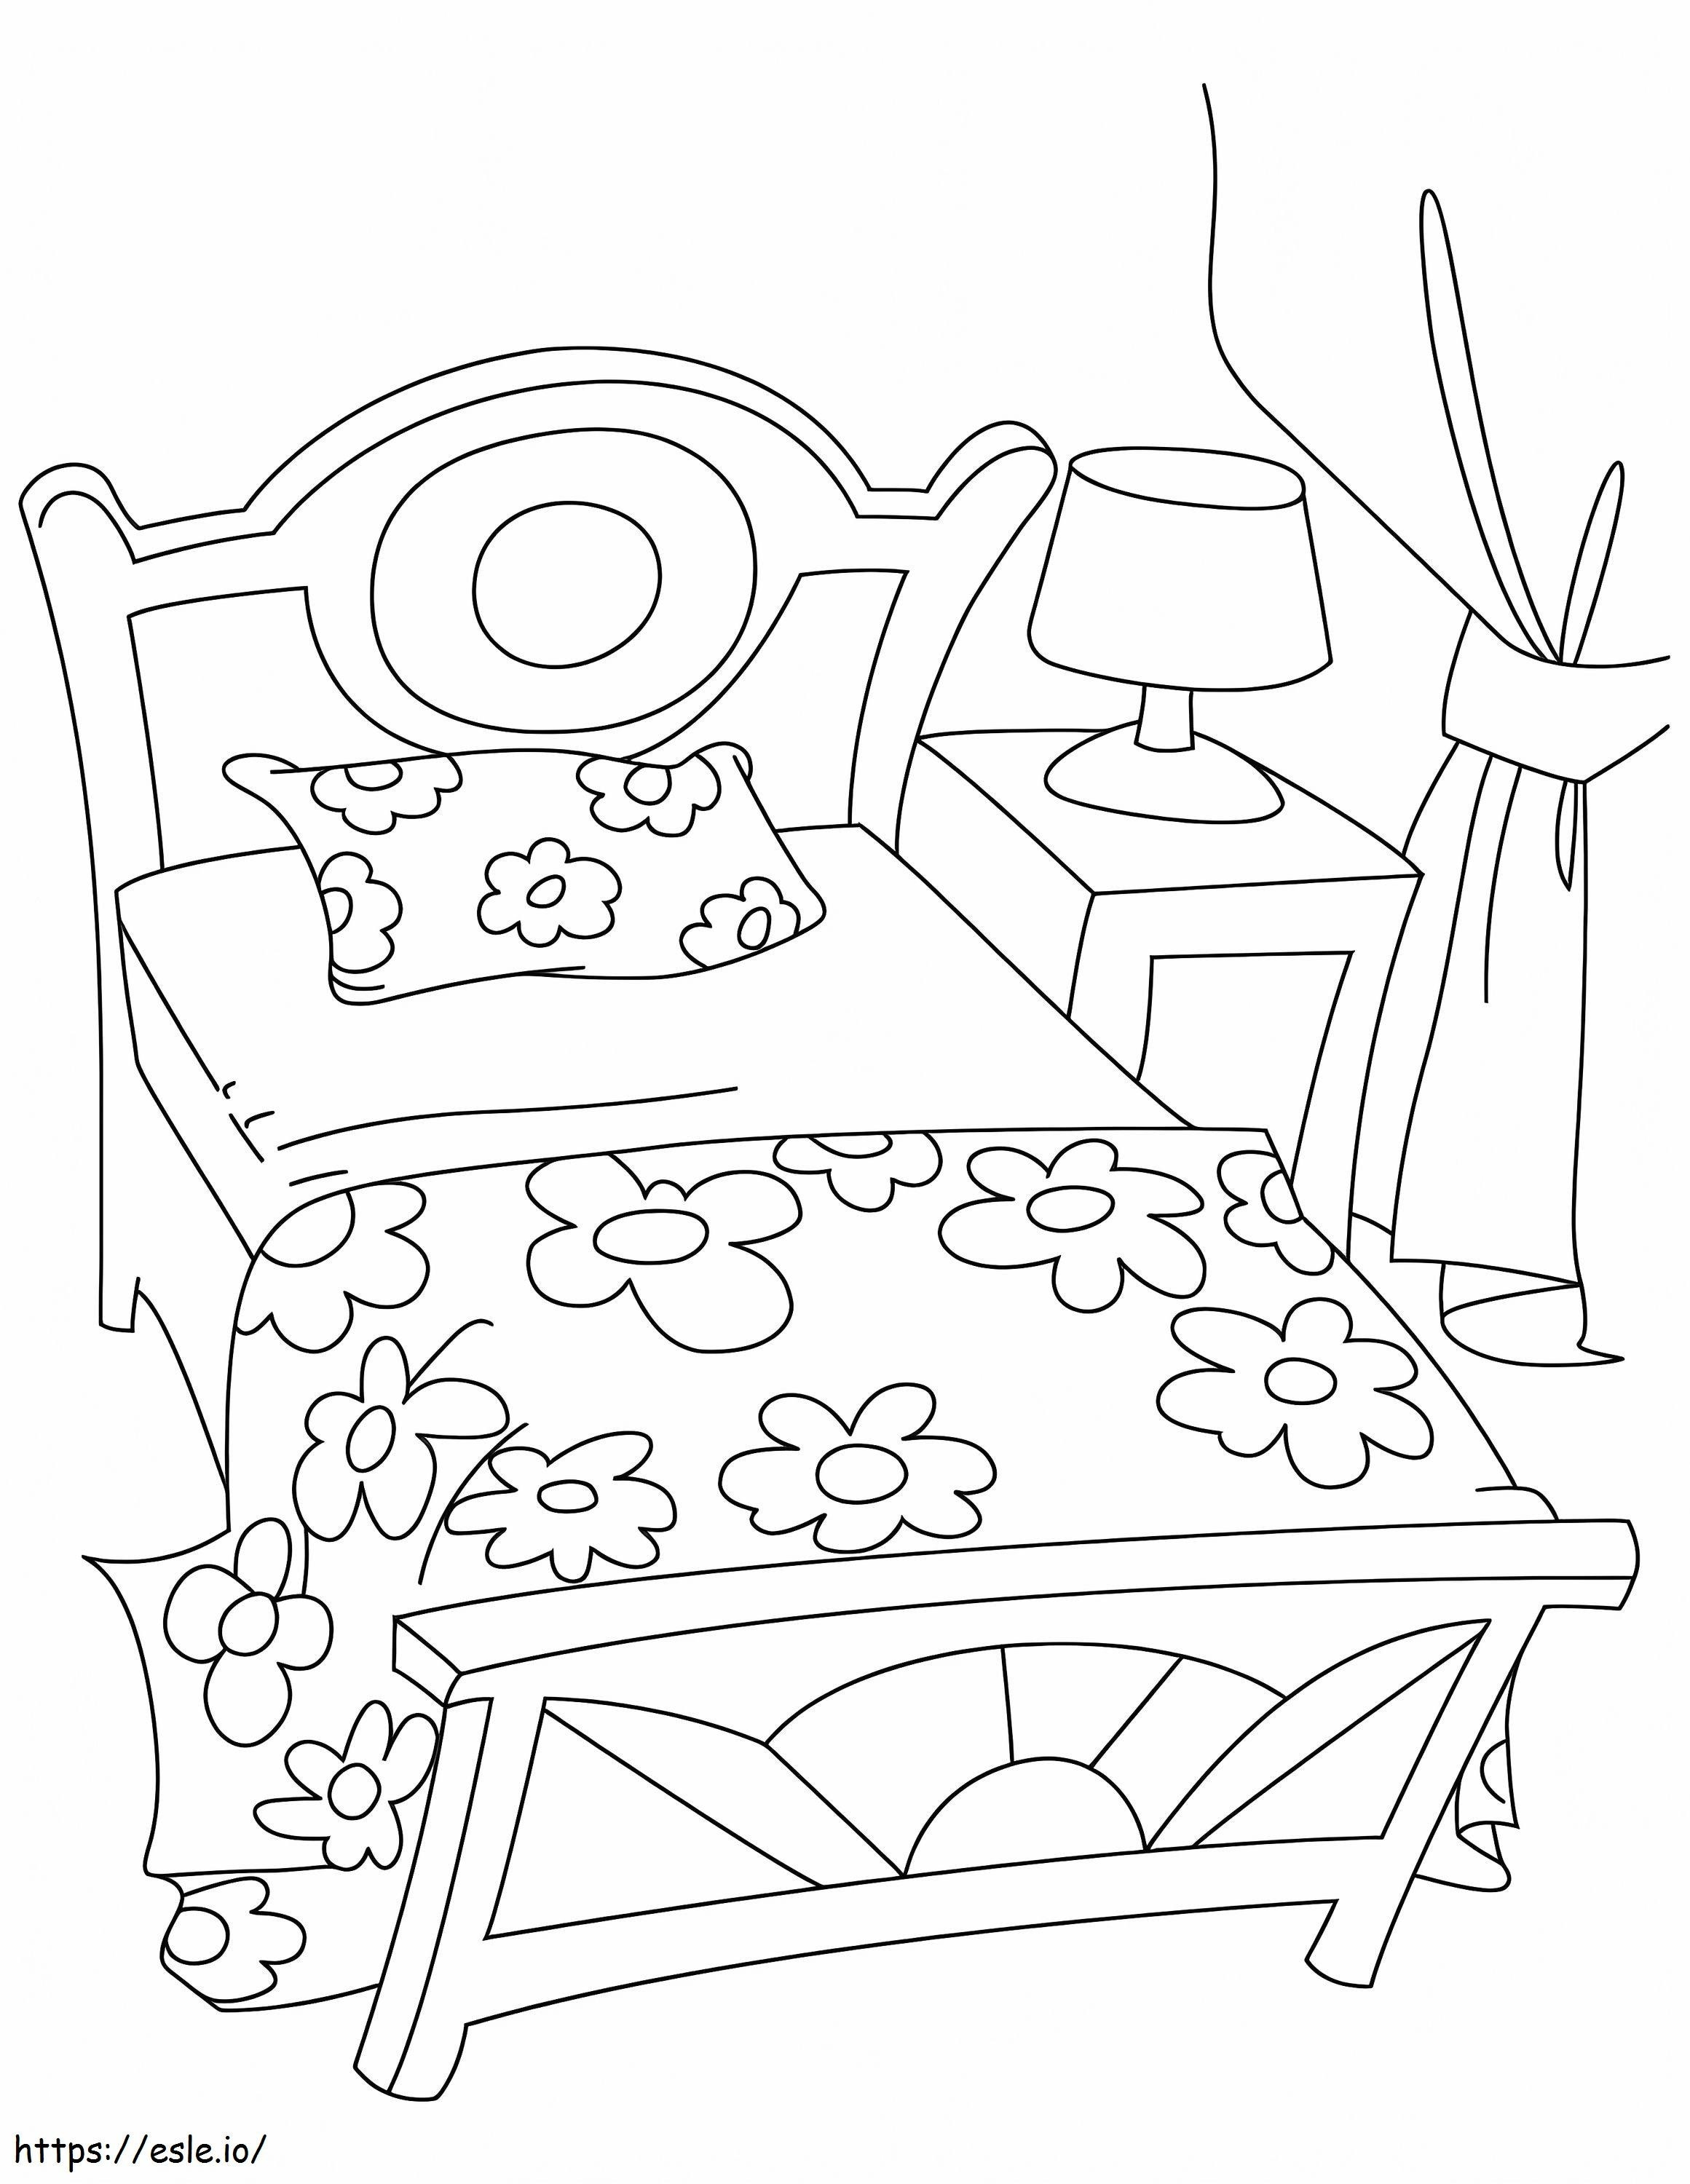 Bed 9 coloring page